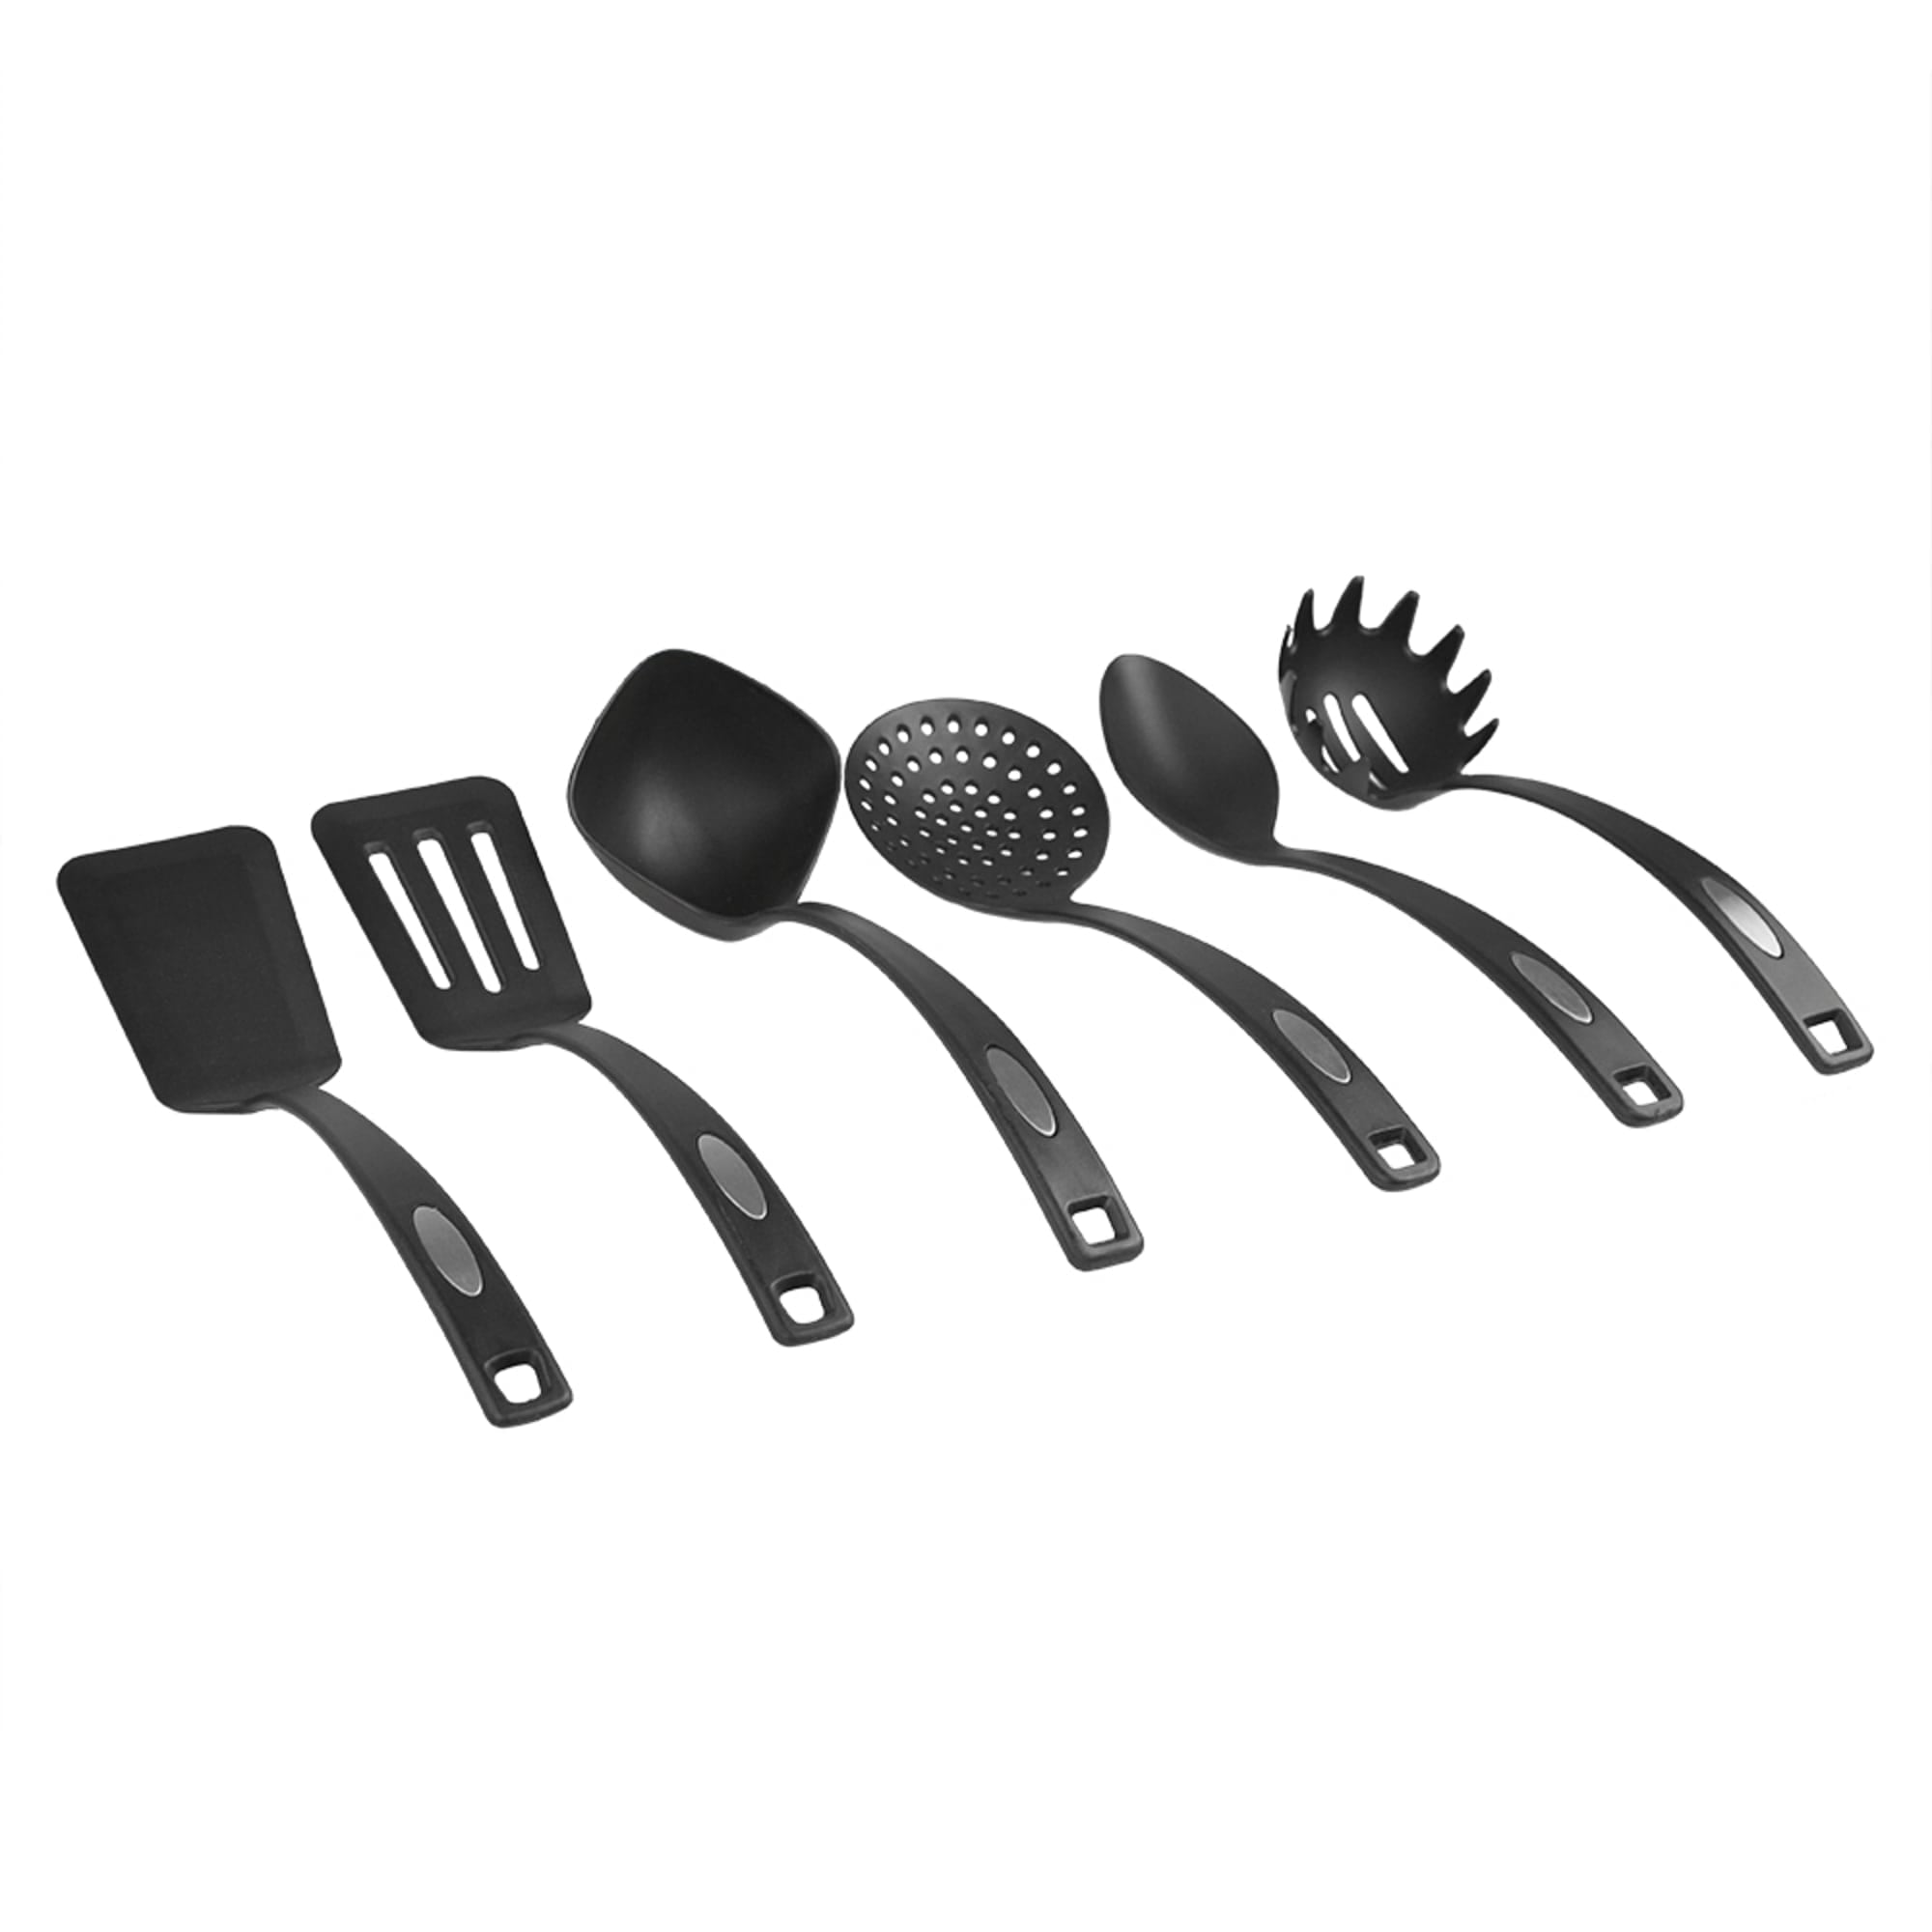 Home Basics 6 Piece Nylon Serving Utensils with Curved Handles, Black, FOOD PREP